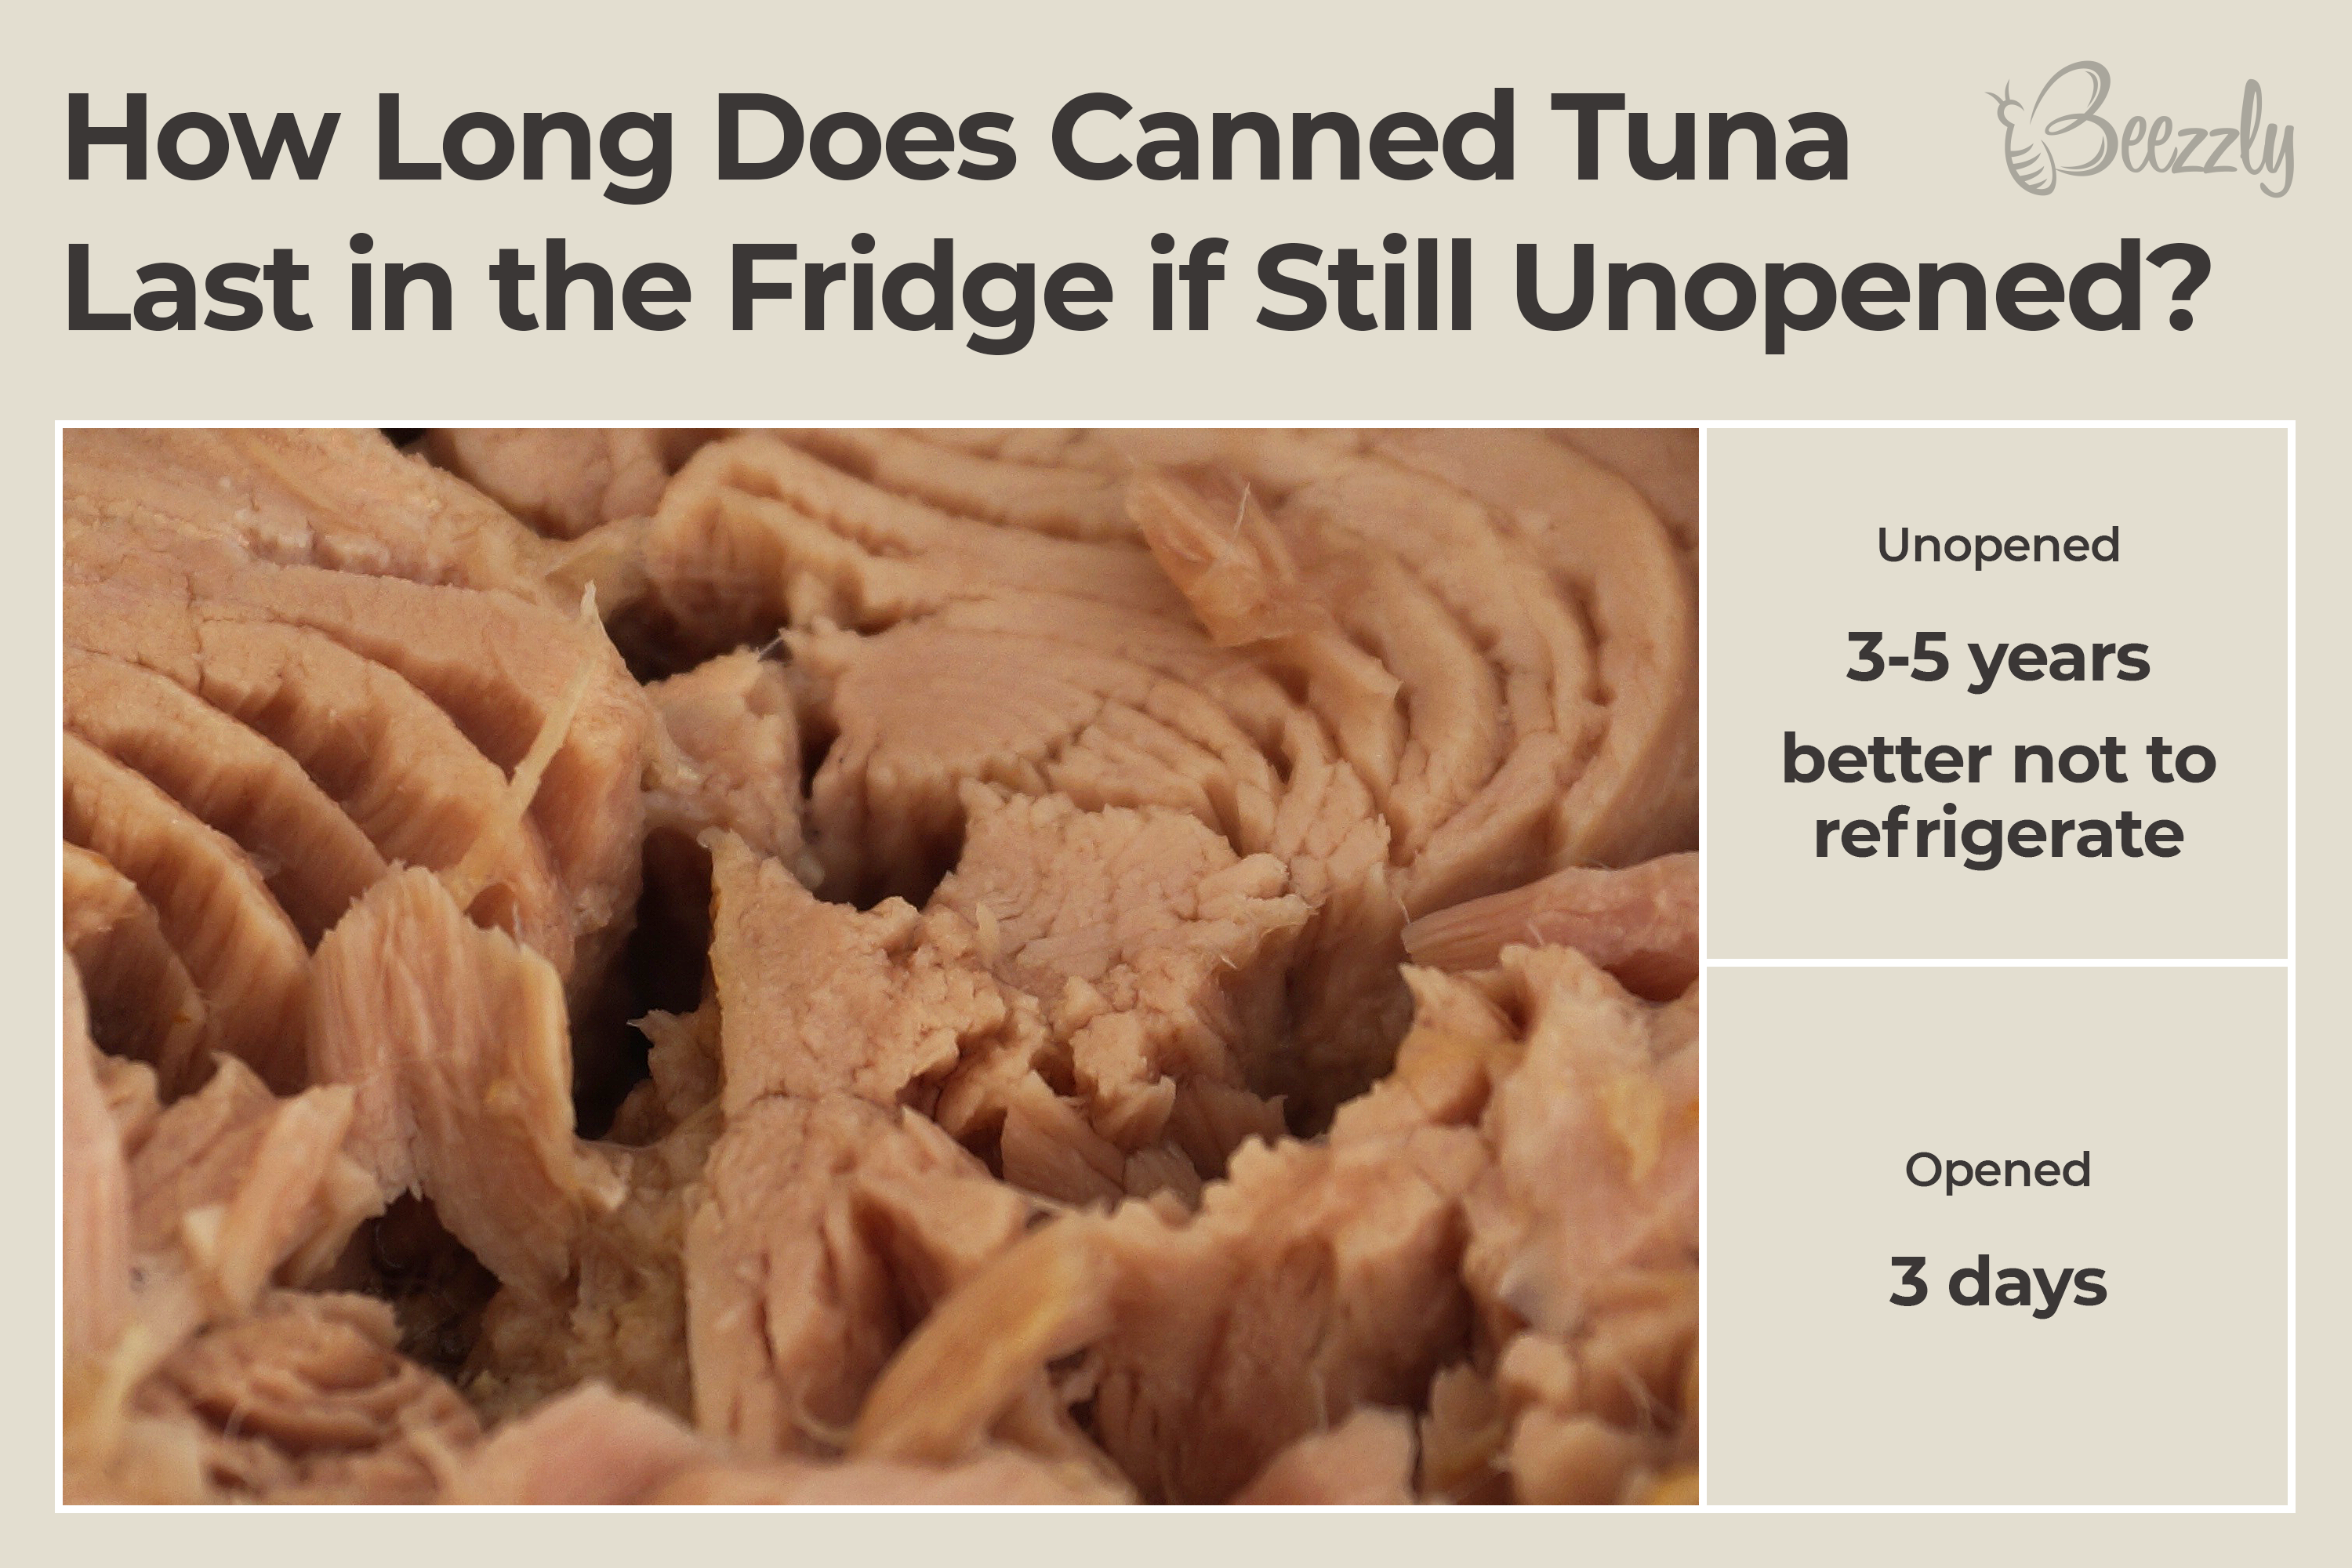 How long does canned tuna last in the fridge if still unopened